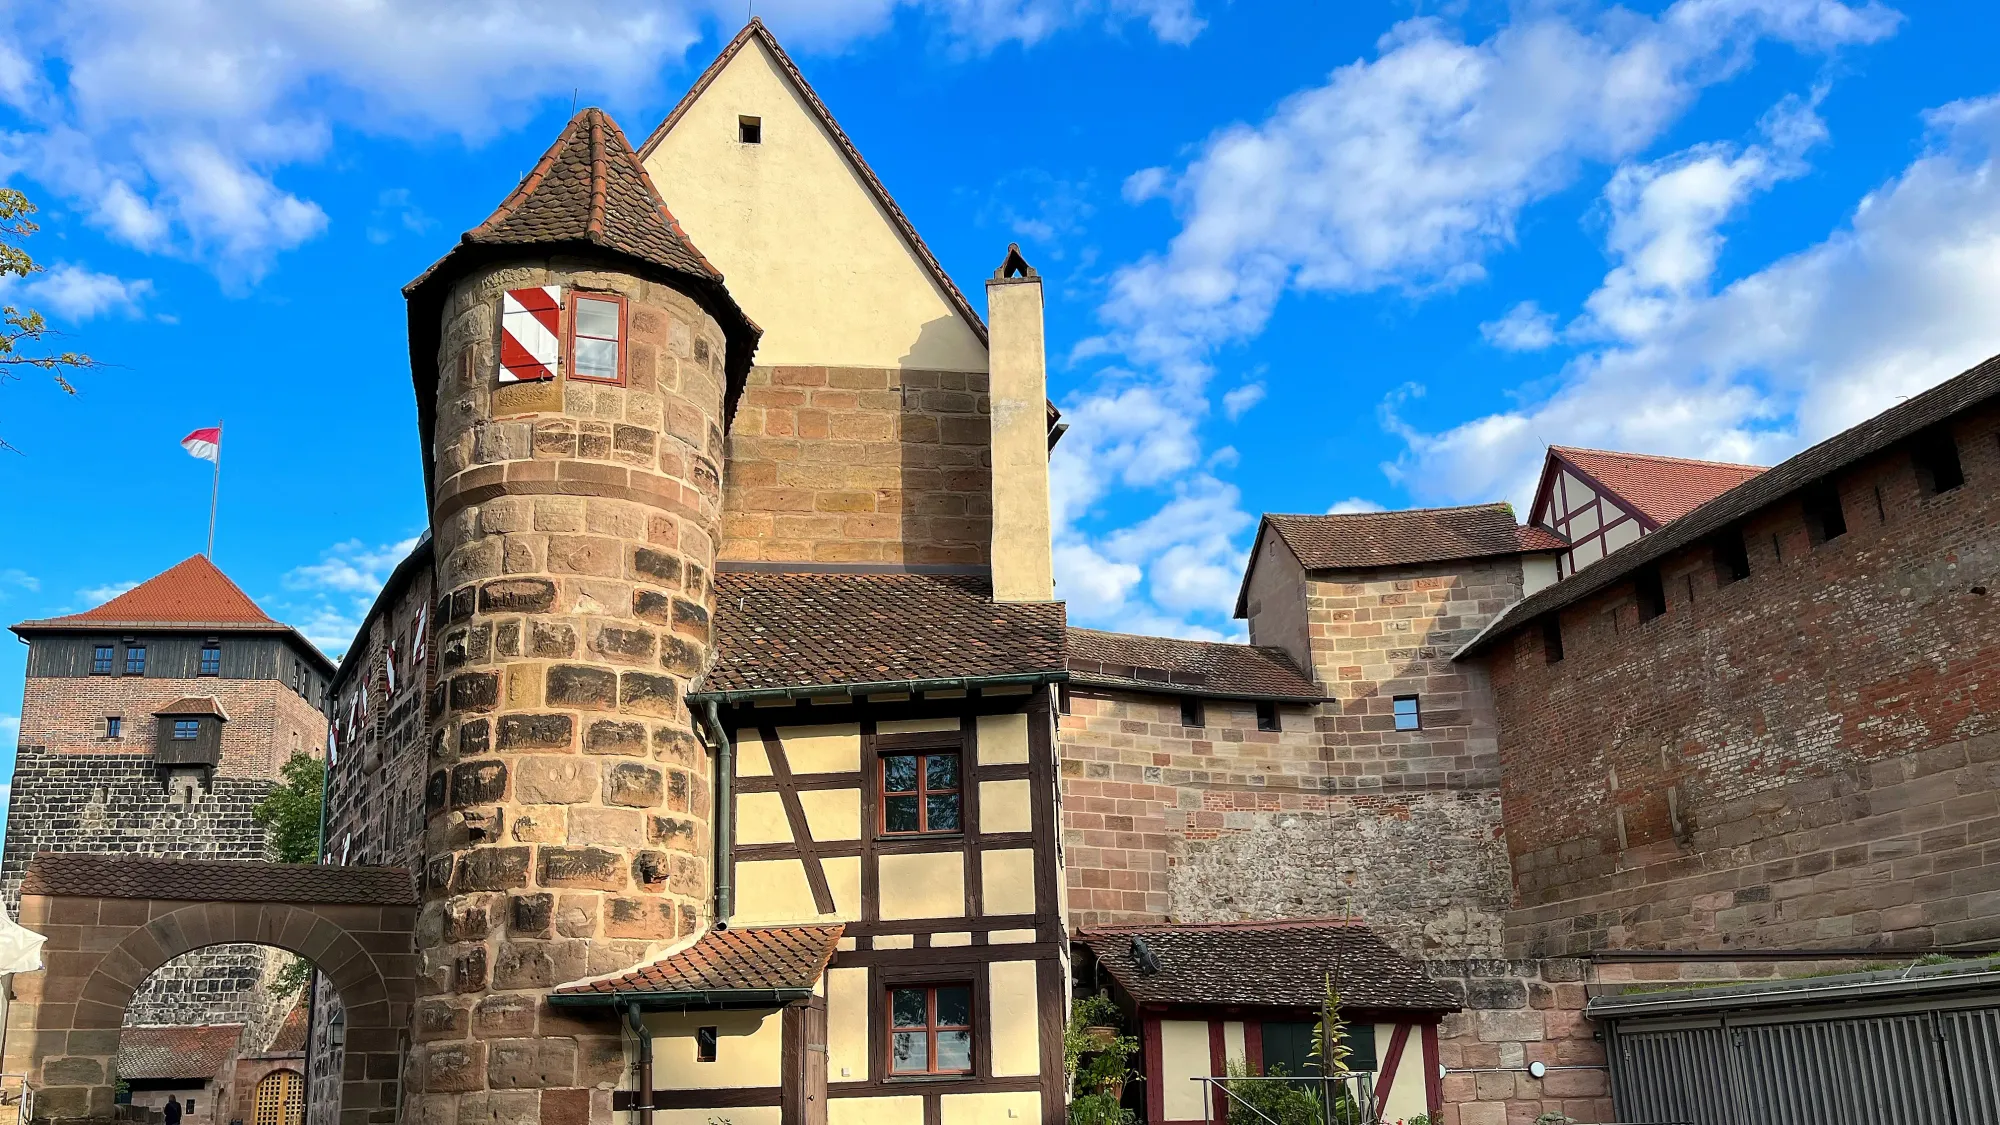 Stone towers along brick walls with a German flag flying